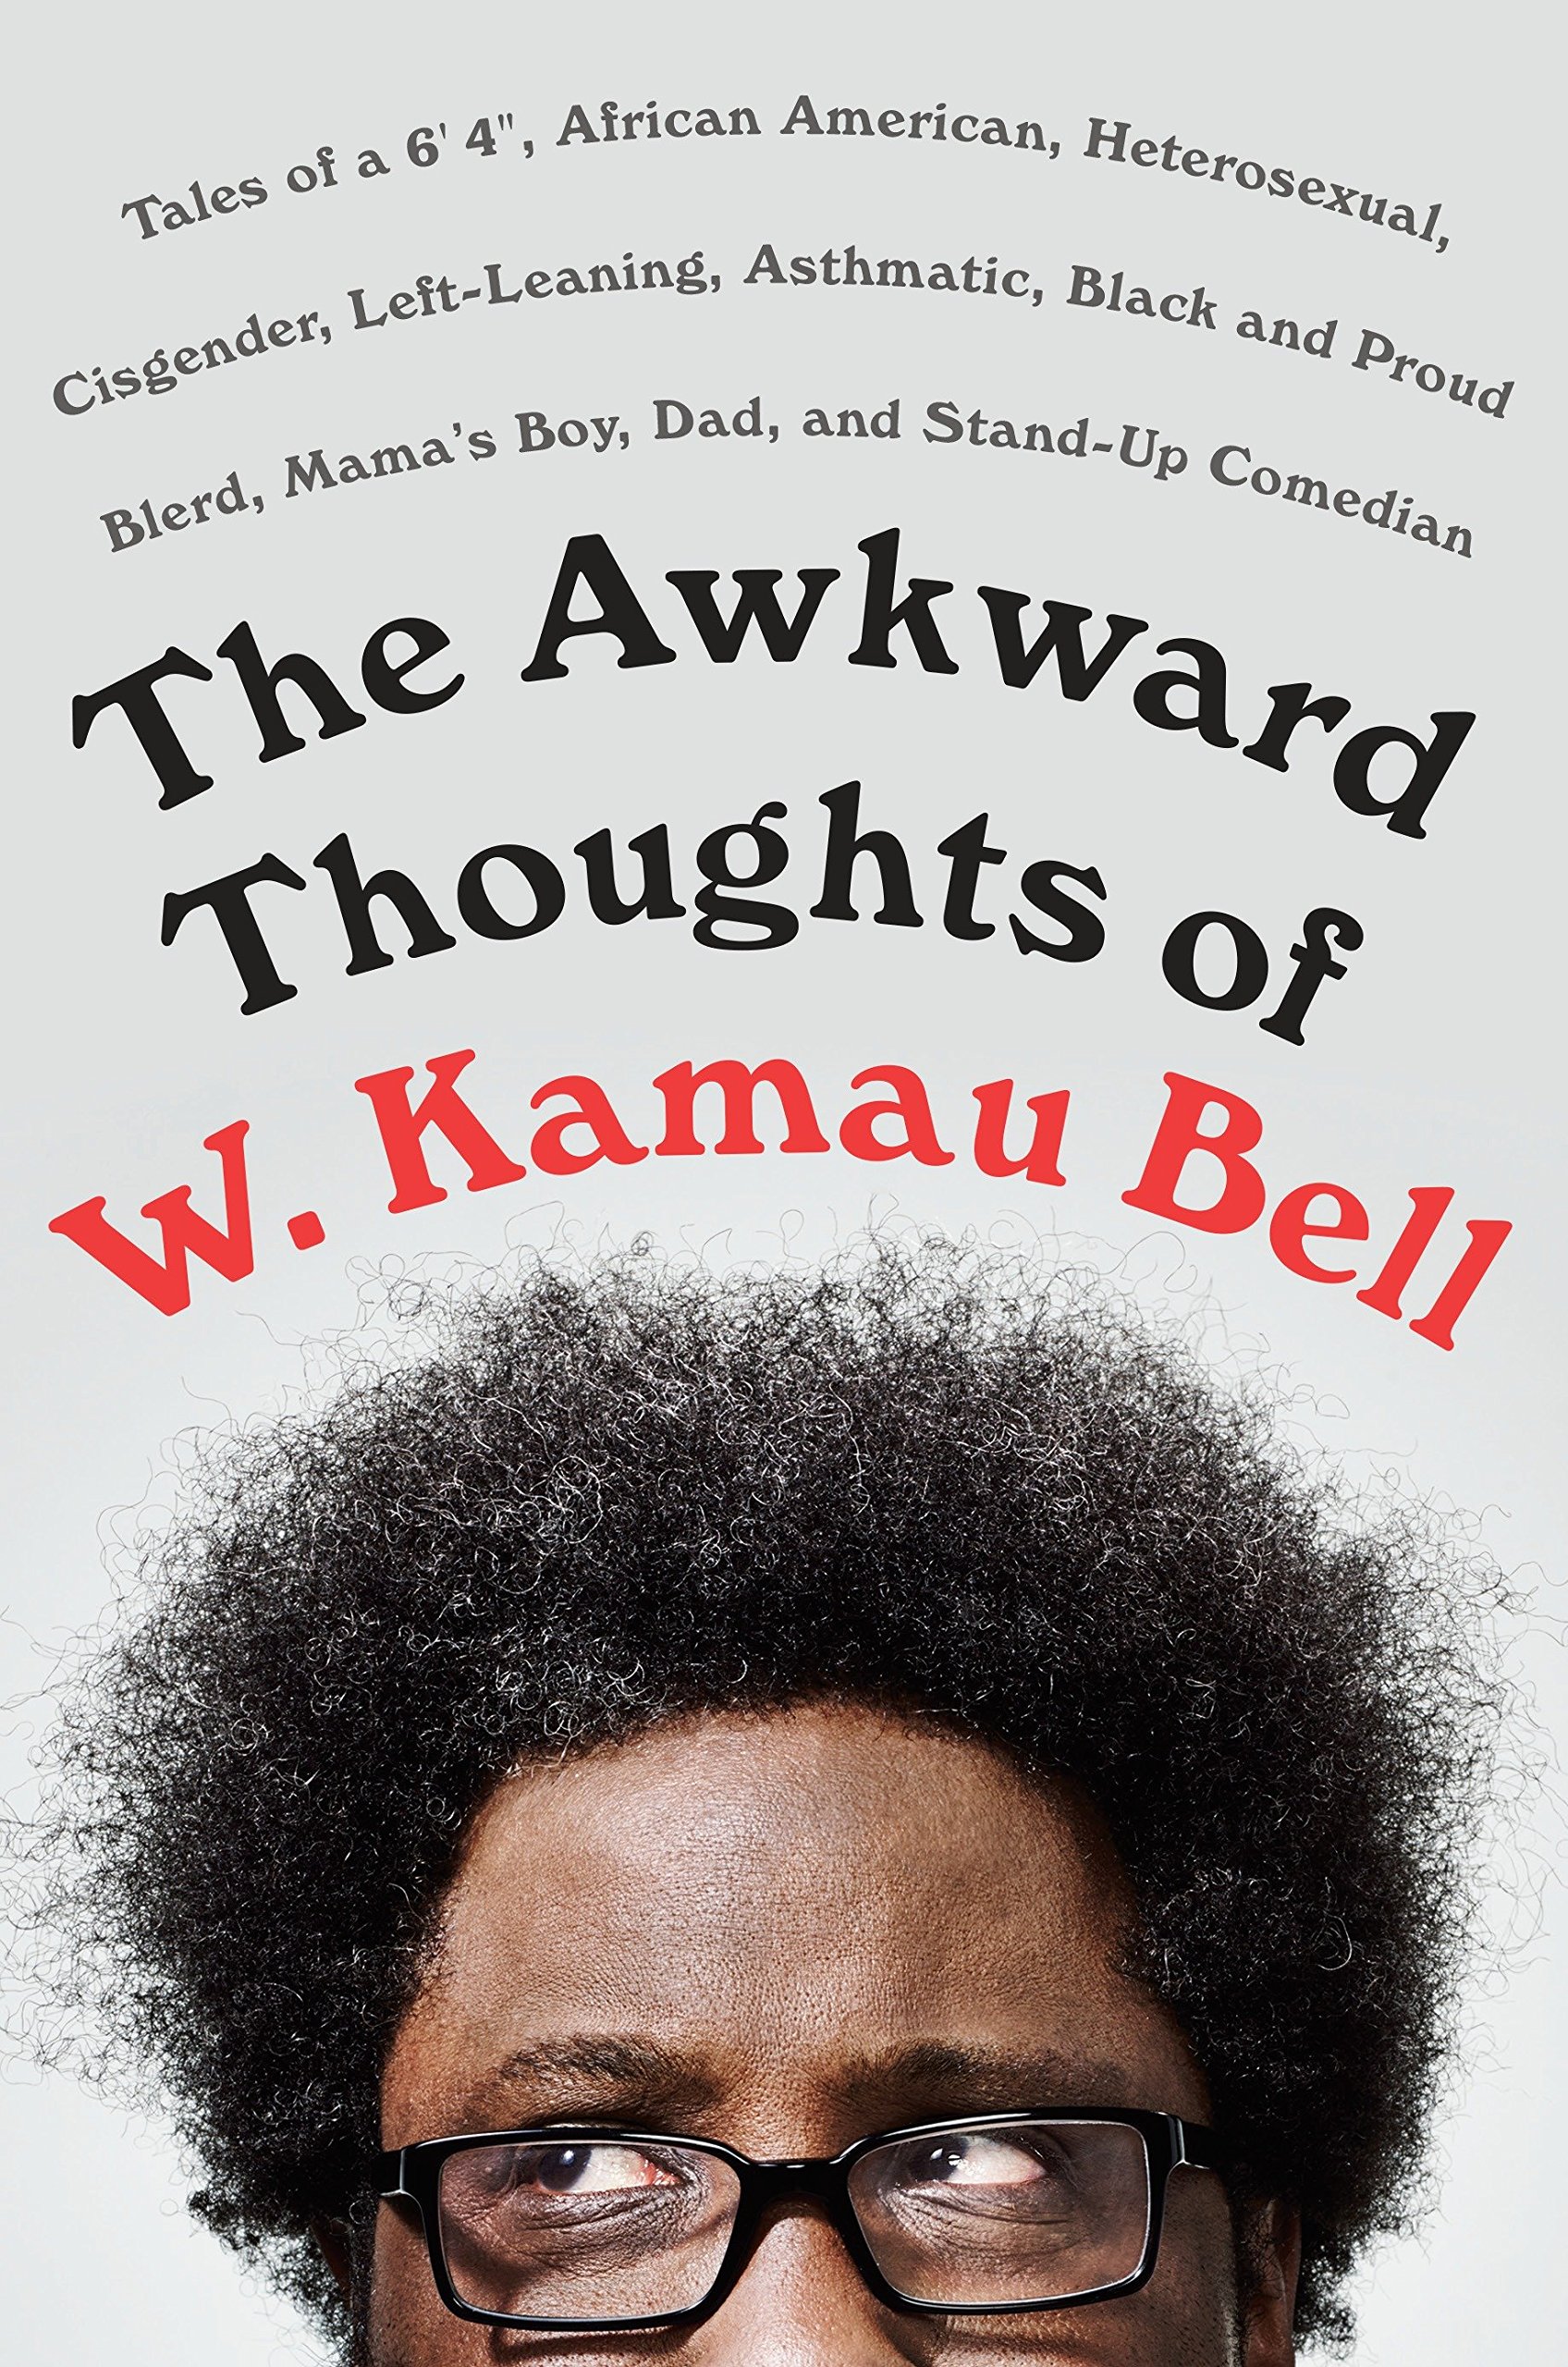 The Awkward Thoughts of W. Kamau Bell: Tales of a 6' 4", African American, Heterosexual, Cisgender, Left-leaning, Asthmatic, Black and Proud Blerd, Mama's Boy, Dad, and Stand-up Comedian